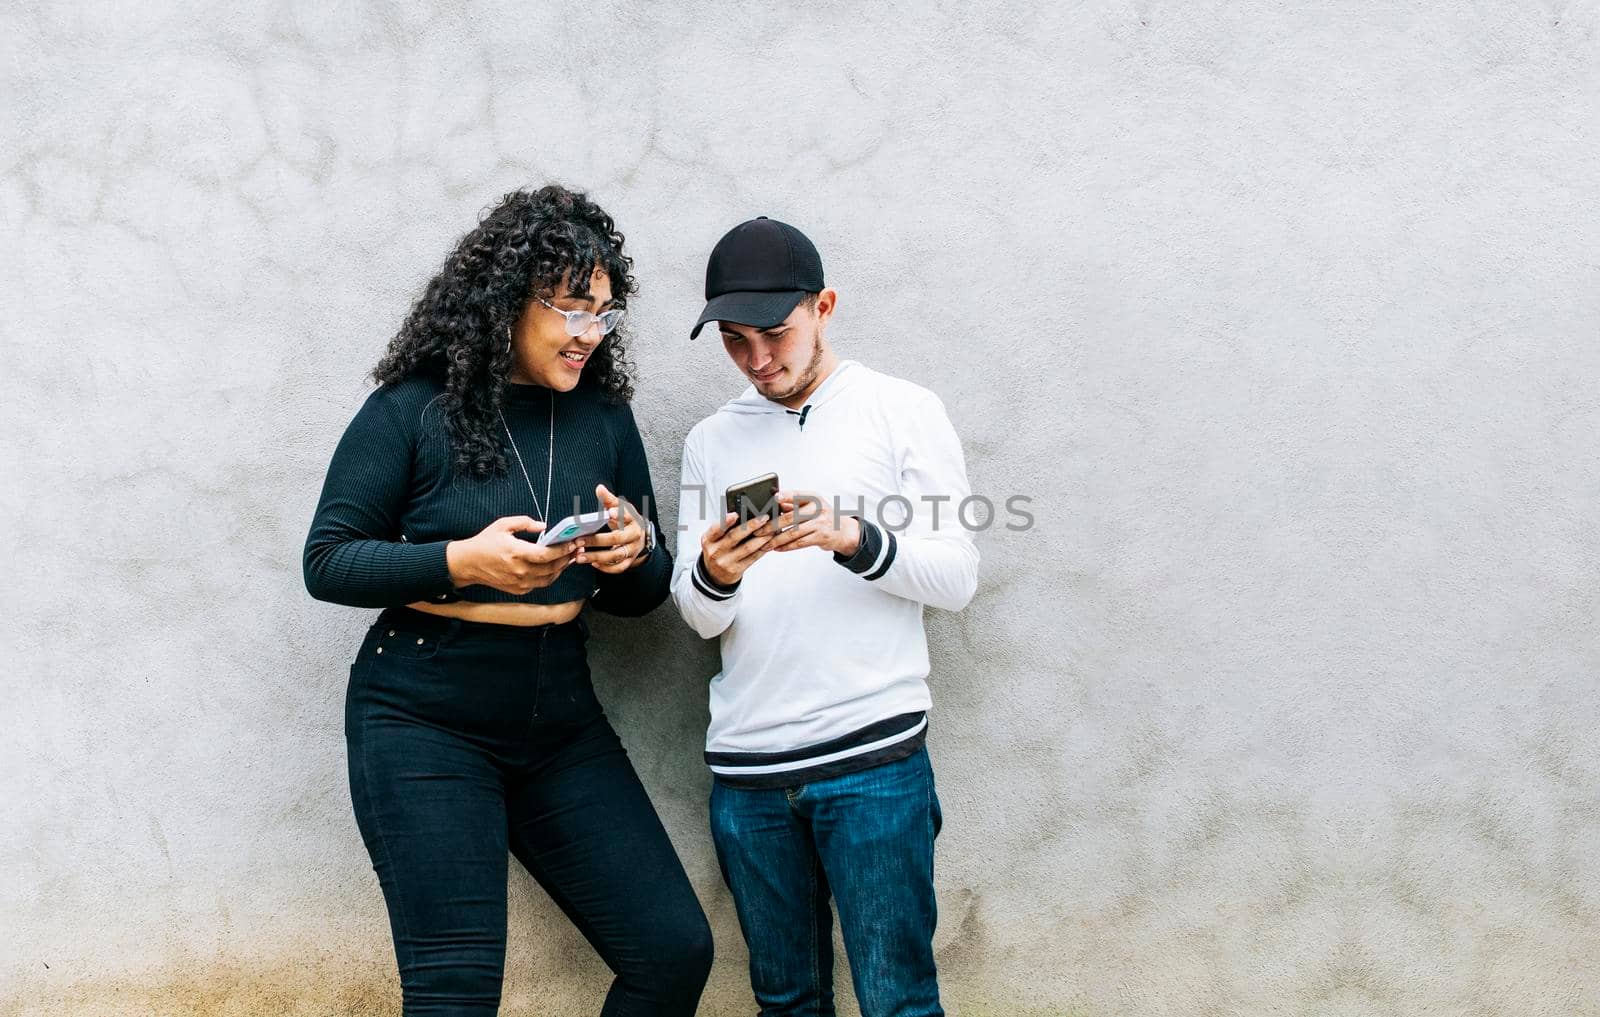 Two teenage friends checking their cell phones and smiling, Two teenagers together checking their cell phones, Guy and girl leaning on a wall checking their cell phones, Two smiling friends checking their cell phones